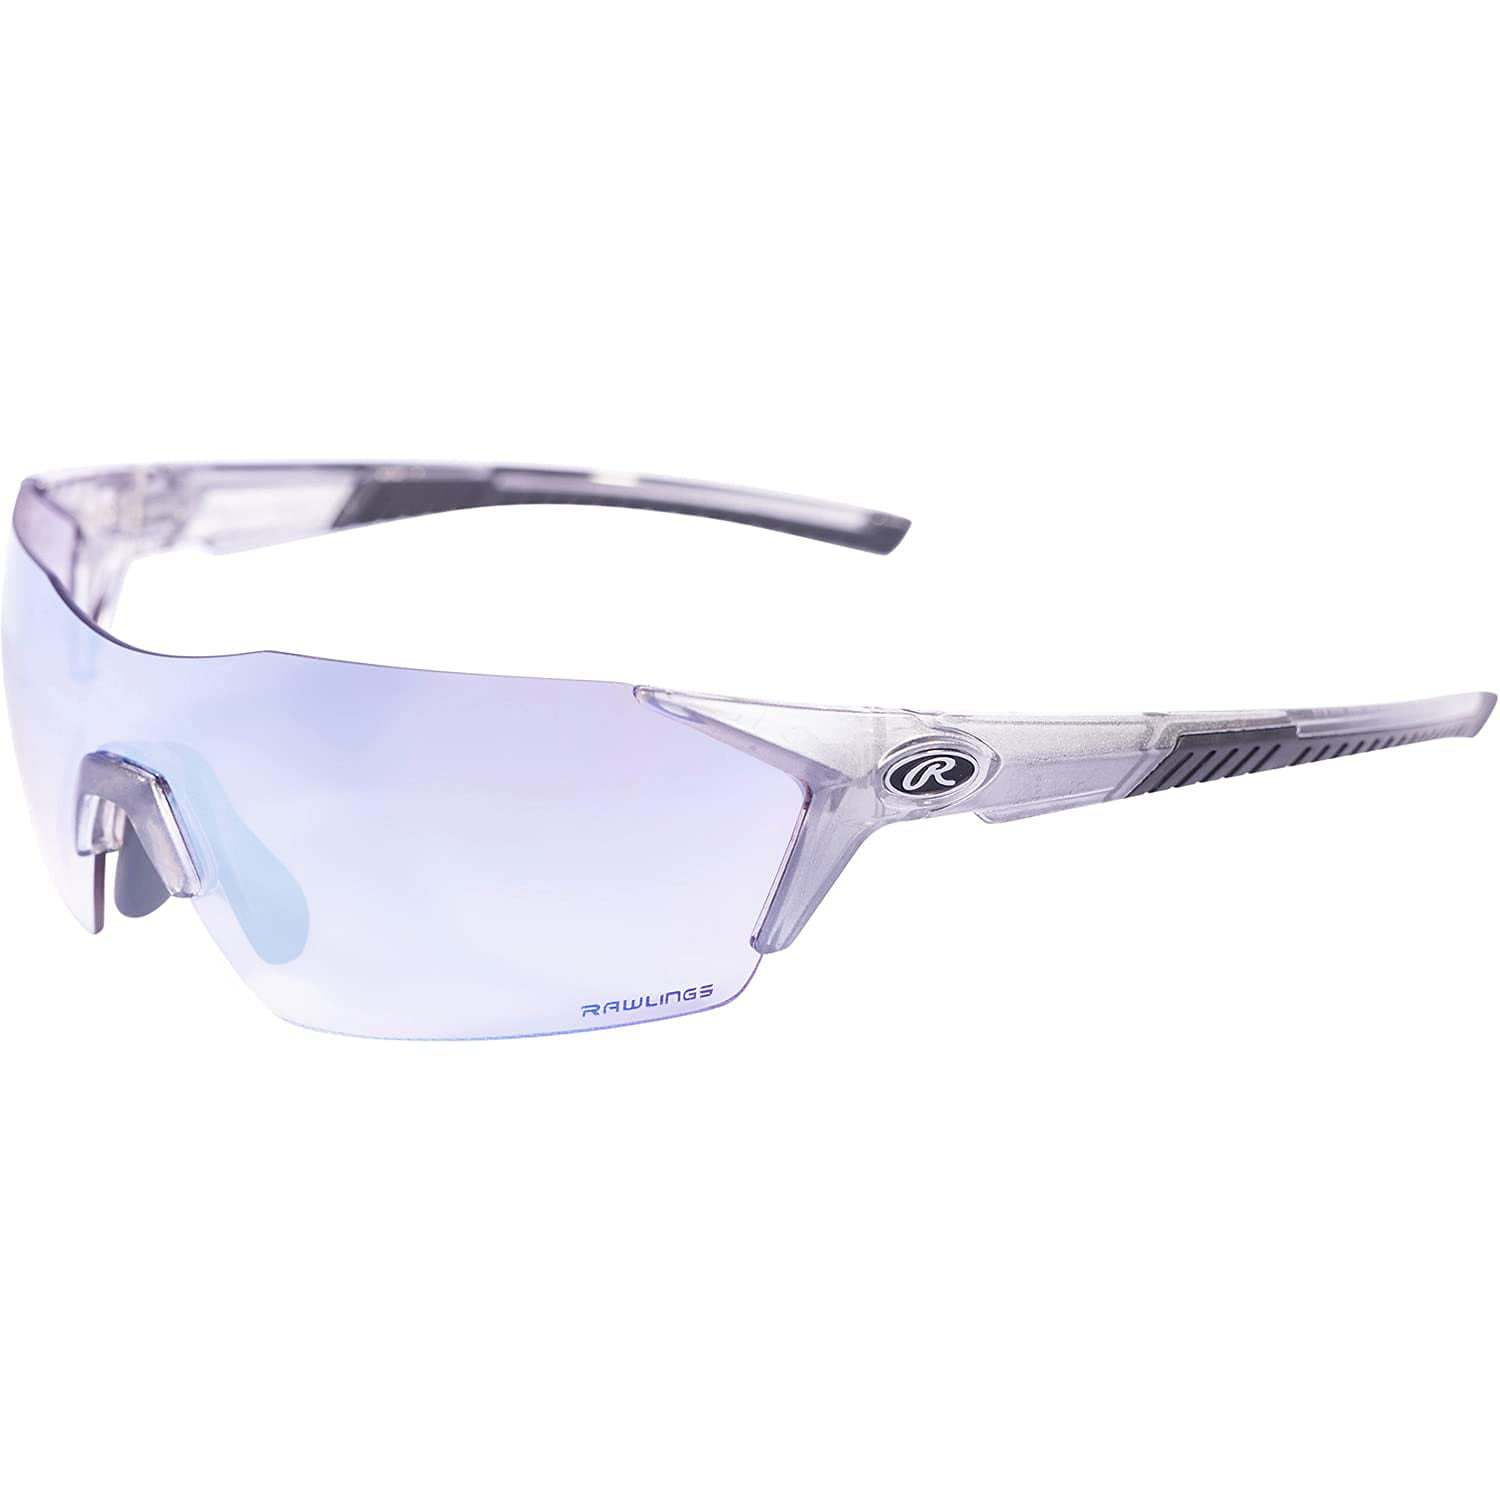 Rawlings Baseball Sunglasses RY1801- Mens Lightweight Adult Sports  Sunglasses - Durable - Scratch Resistant - Available in Four Colors 